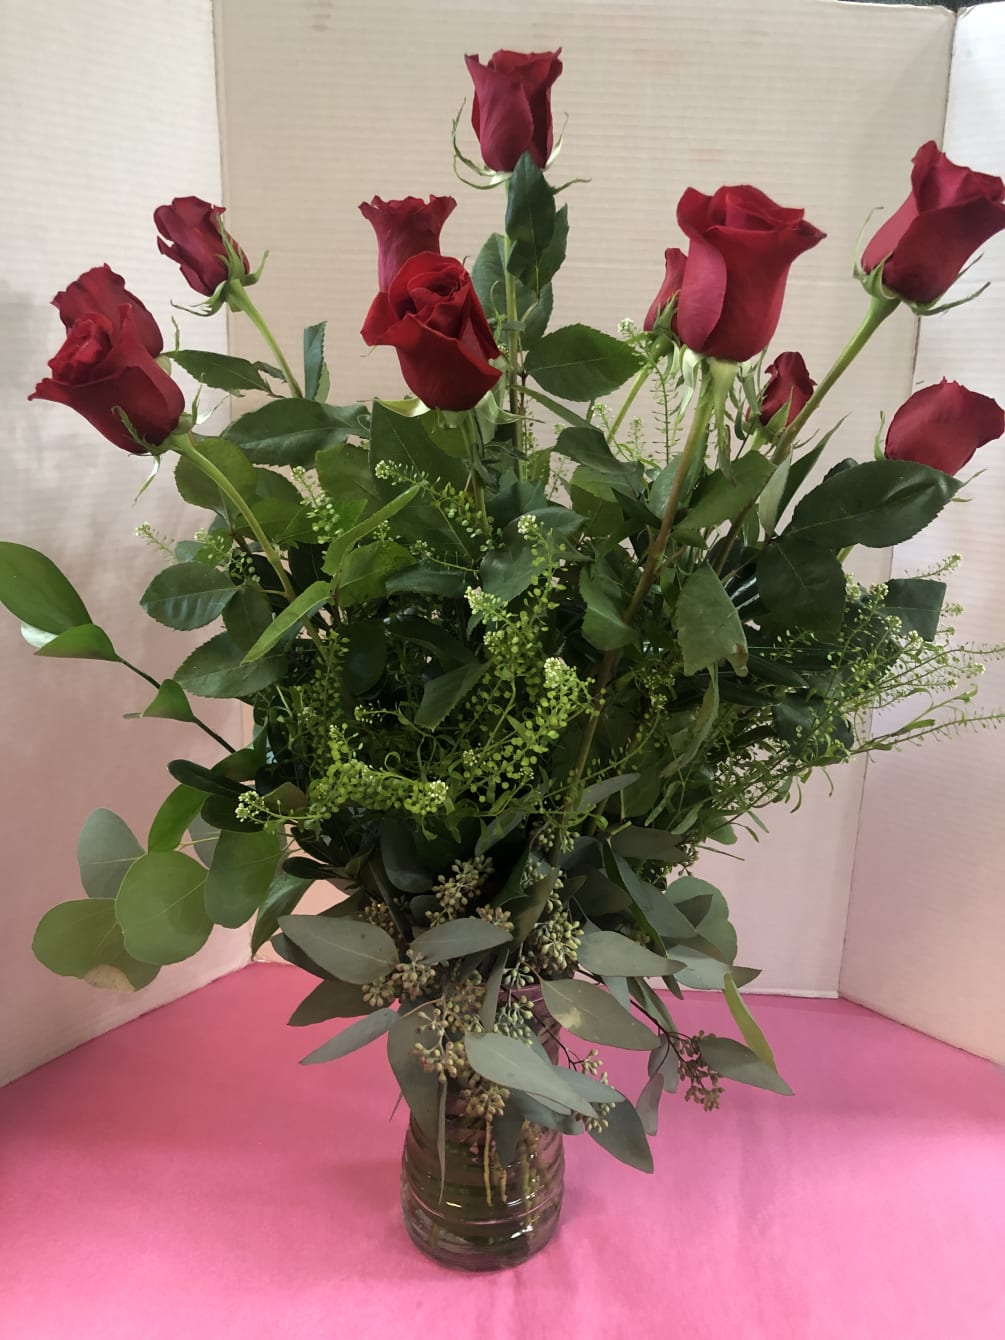 Premium Long Stem Red Roses with Fancy Greens in a Tall Vase.

Call